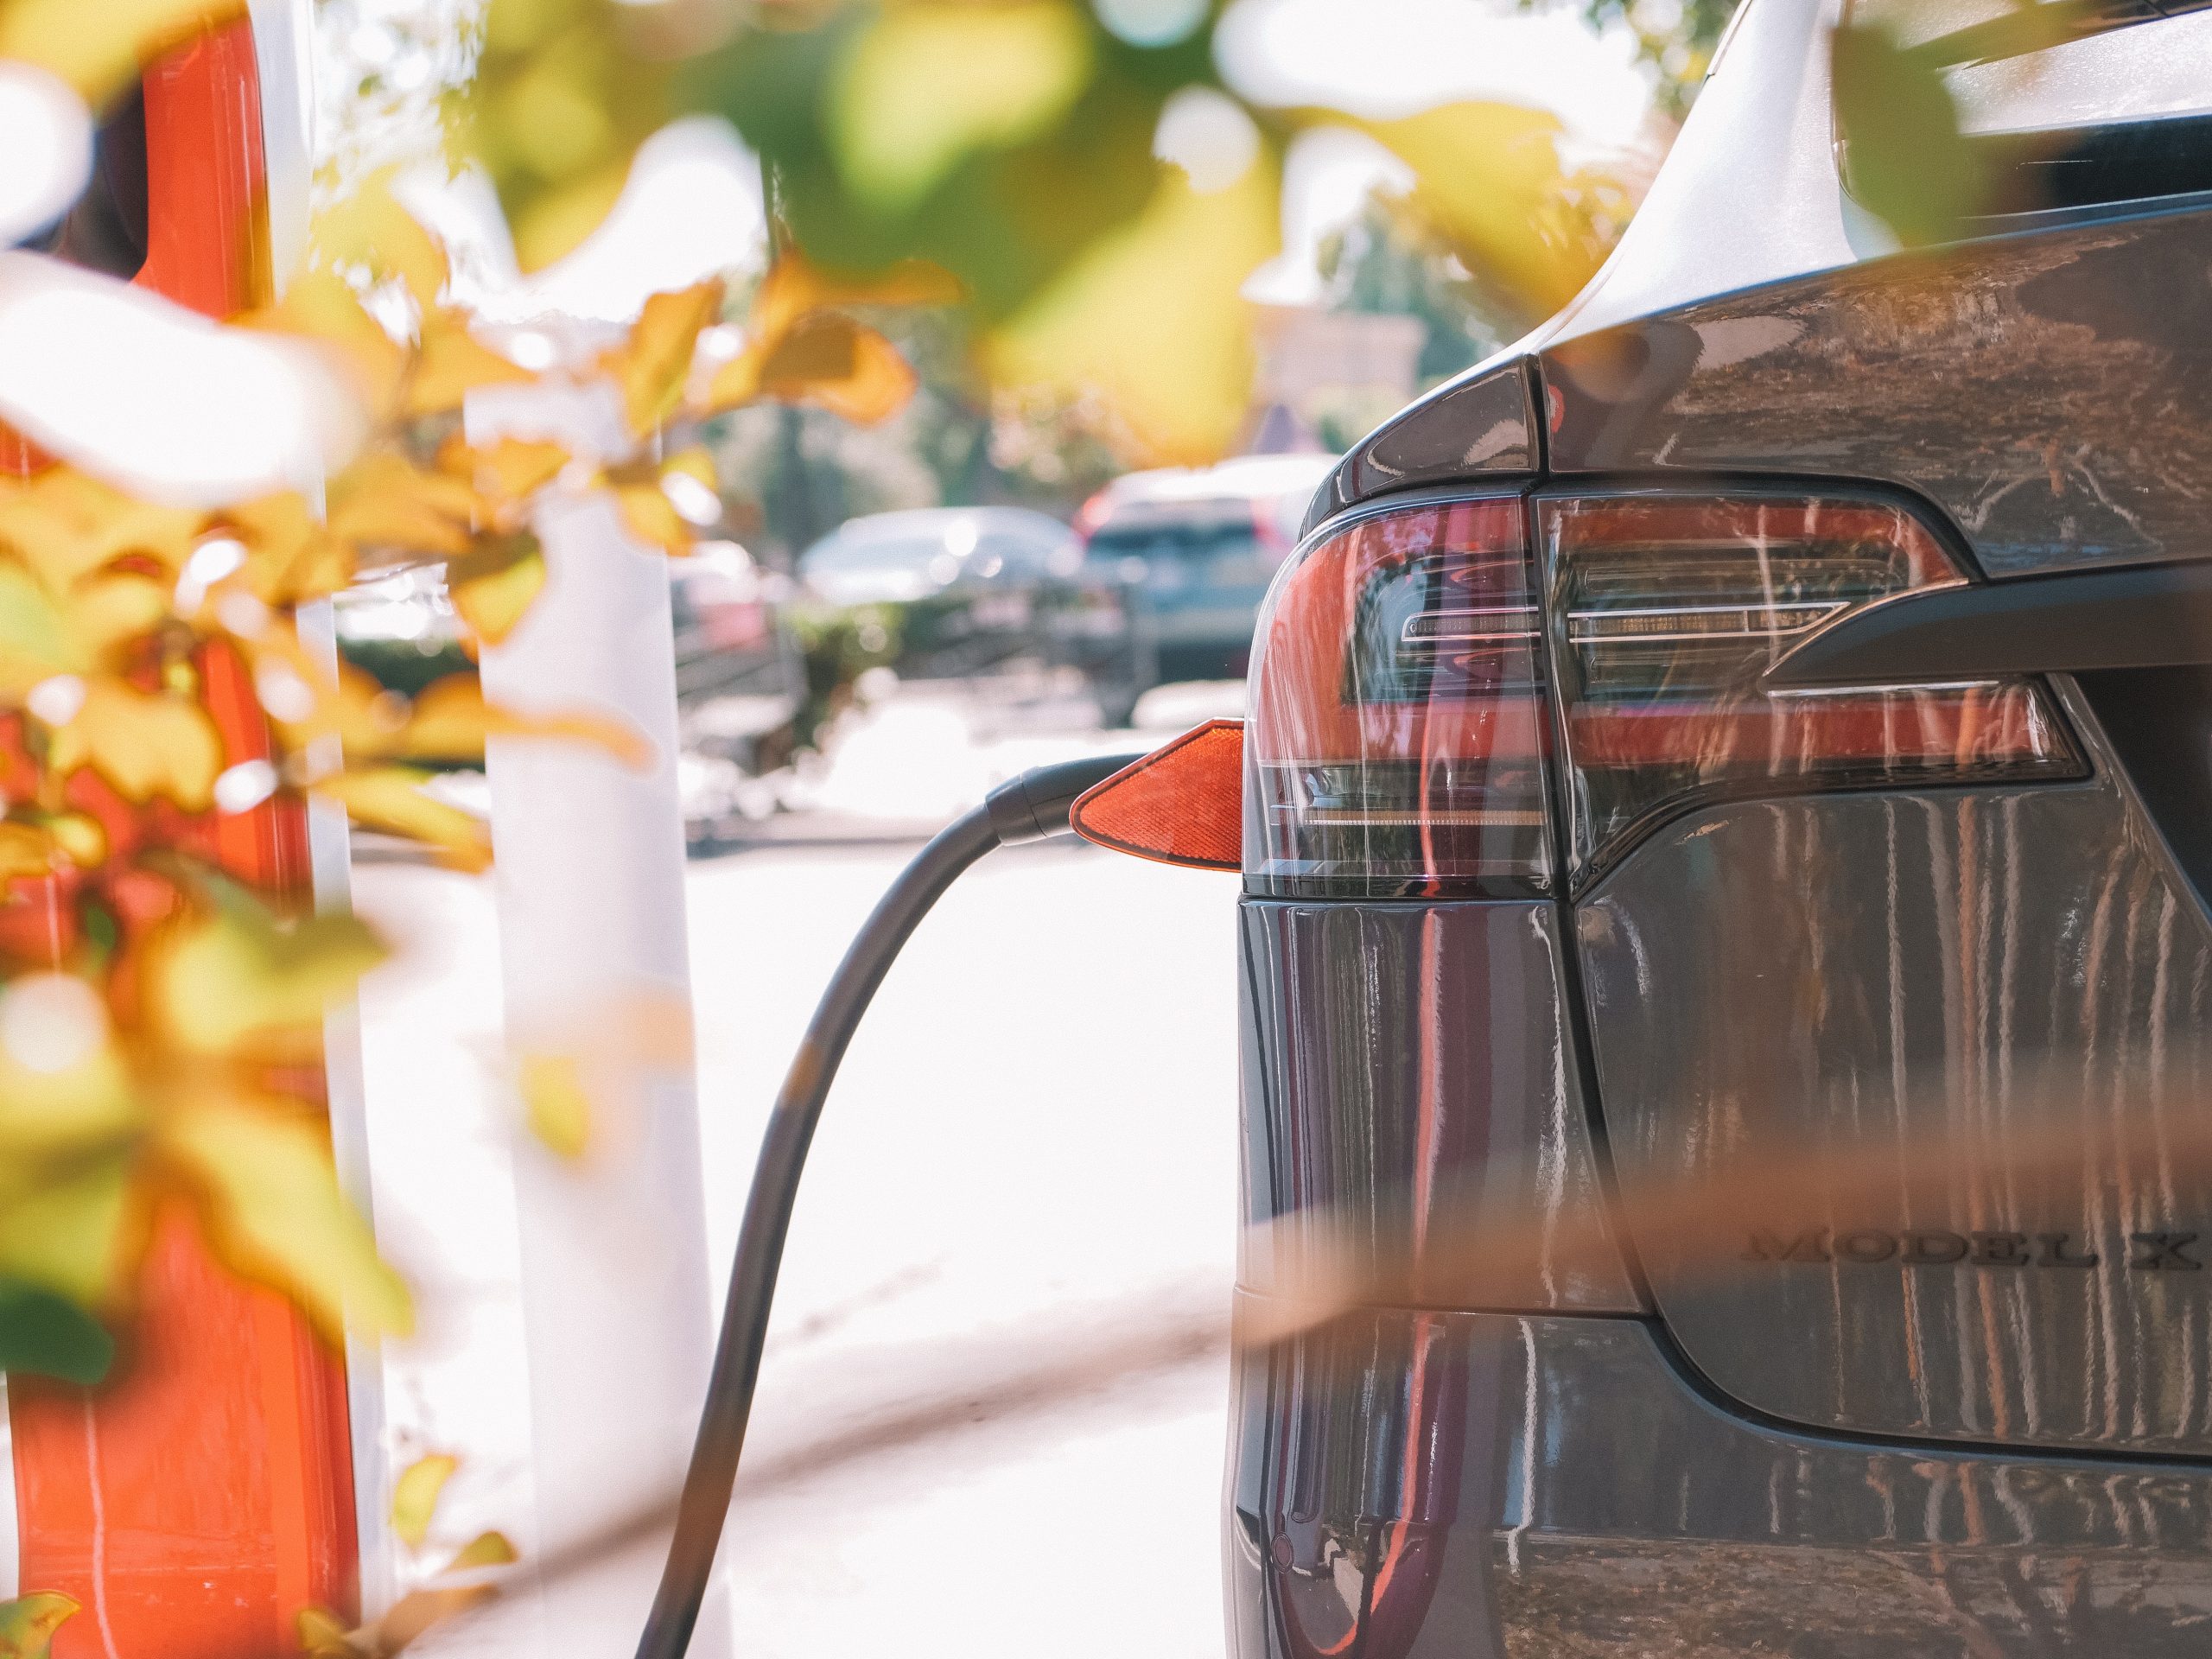 Supply Chain Challenges in the EV Industry: Focus on EV Battery